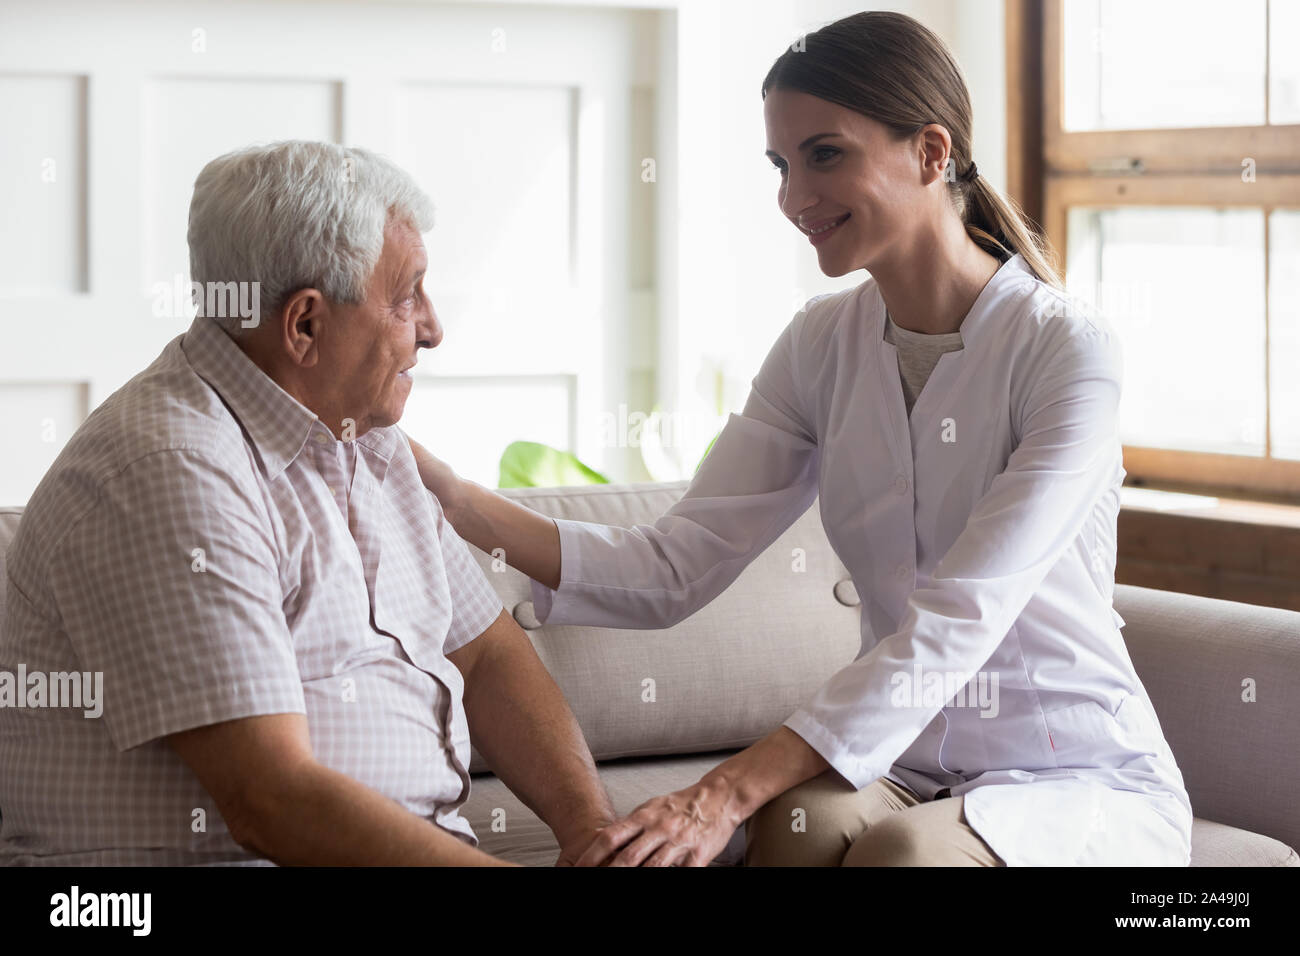 Old man patient and careful nurse or caregiver communication indoors Stock Photo